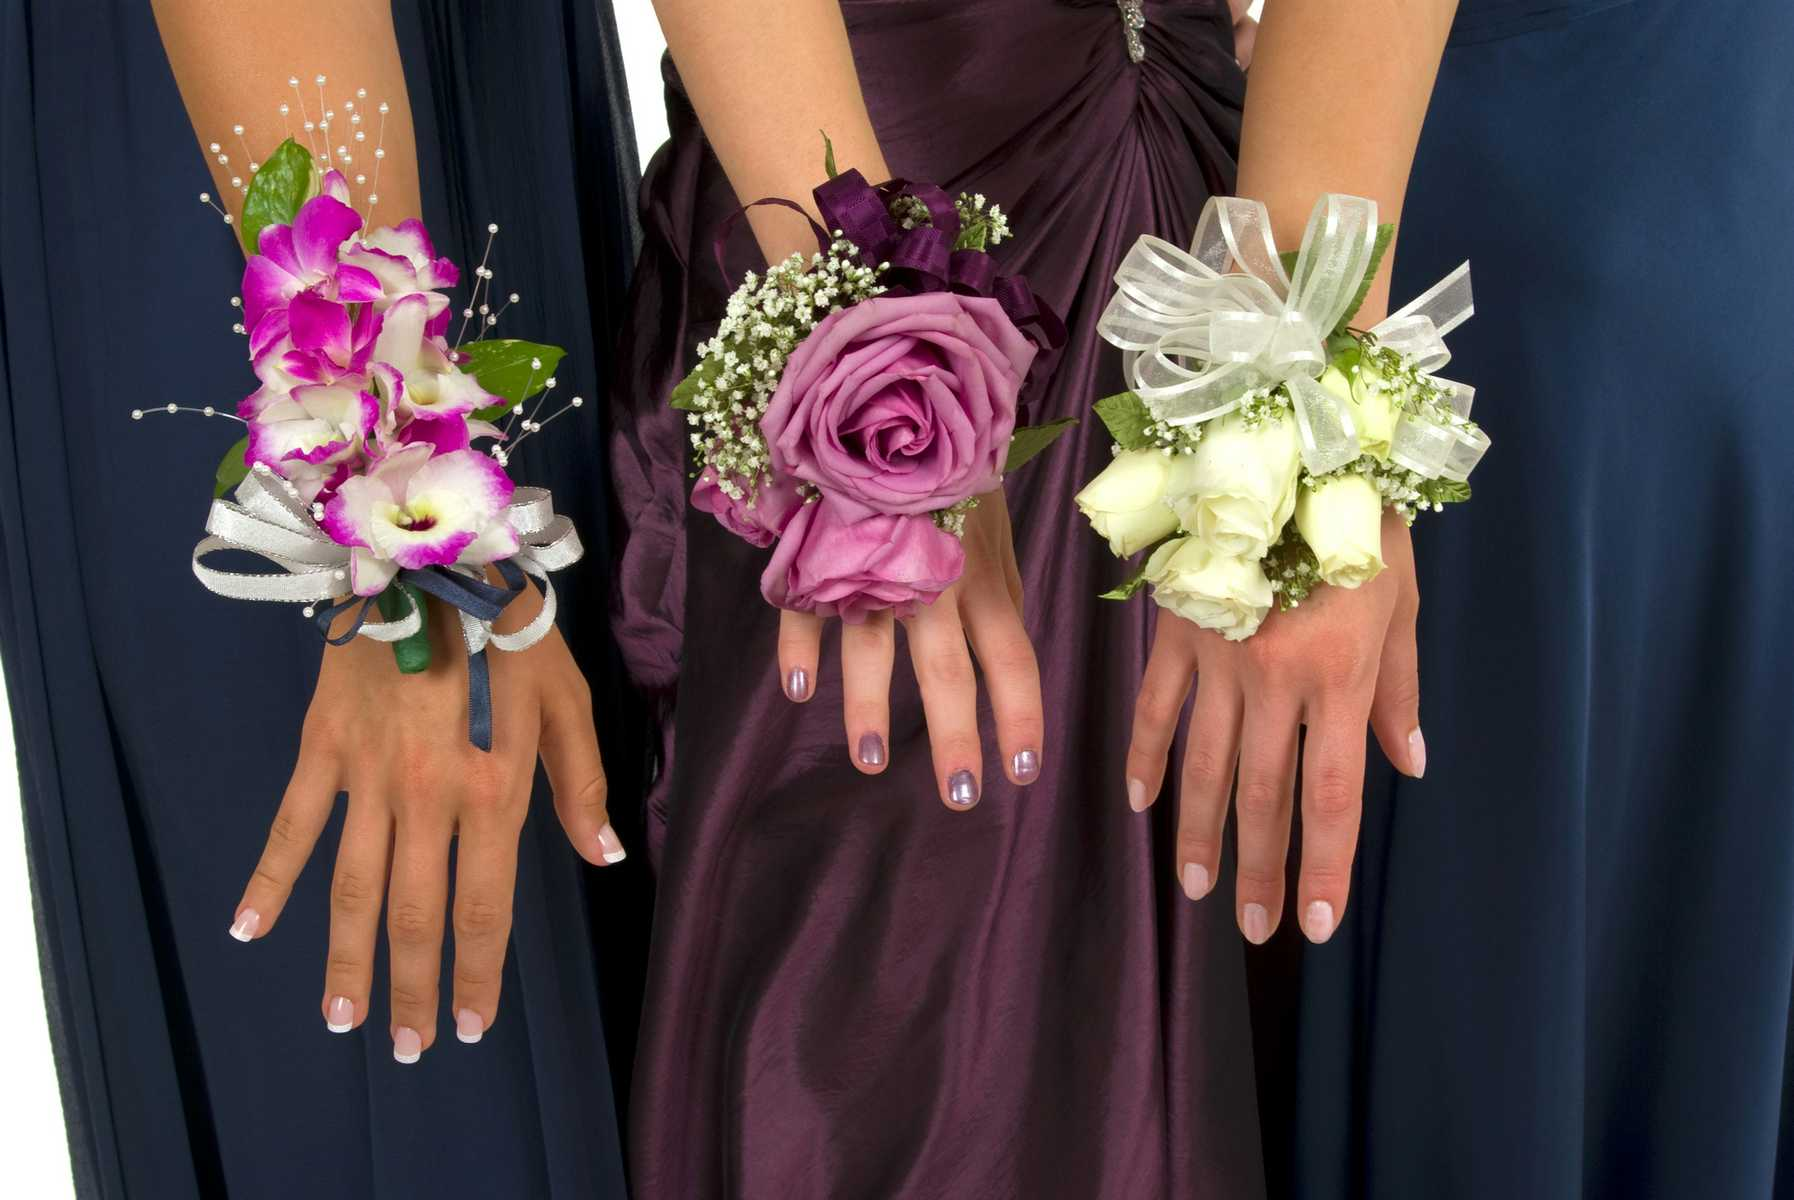 School Homecoming Dance Corsages on Girls' Wrists